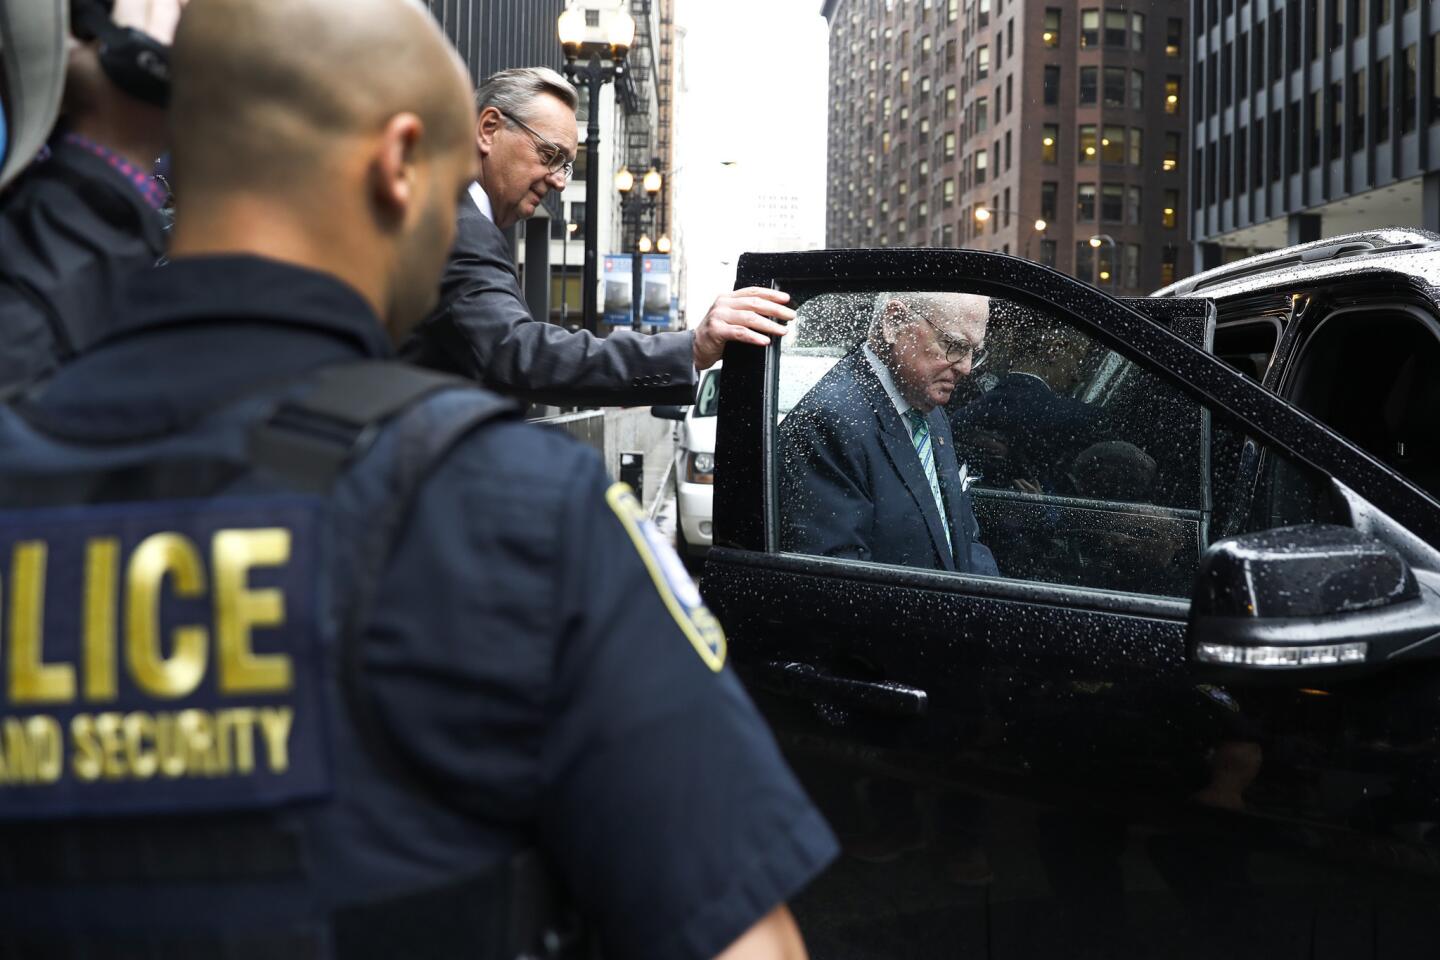 Ald. Ed Burke, 14th, departs the Dirksen U.S. Courthouse in Chicago on June 4, 2019 after being arraigned on multiple federal corruption charges.